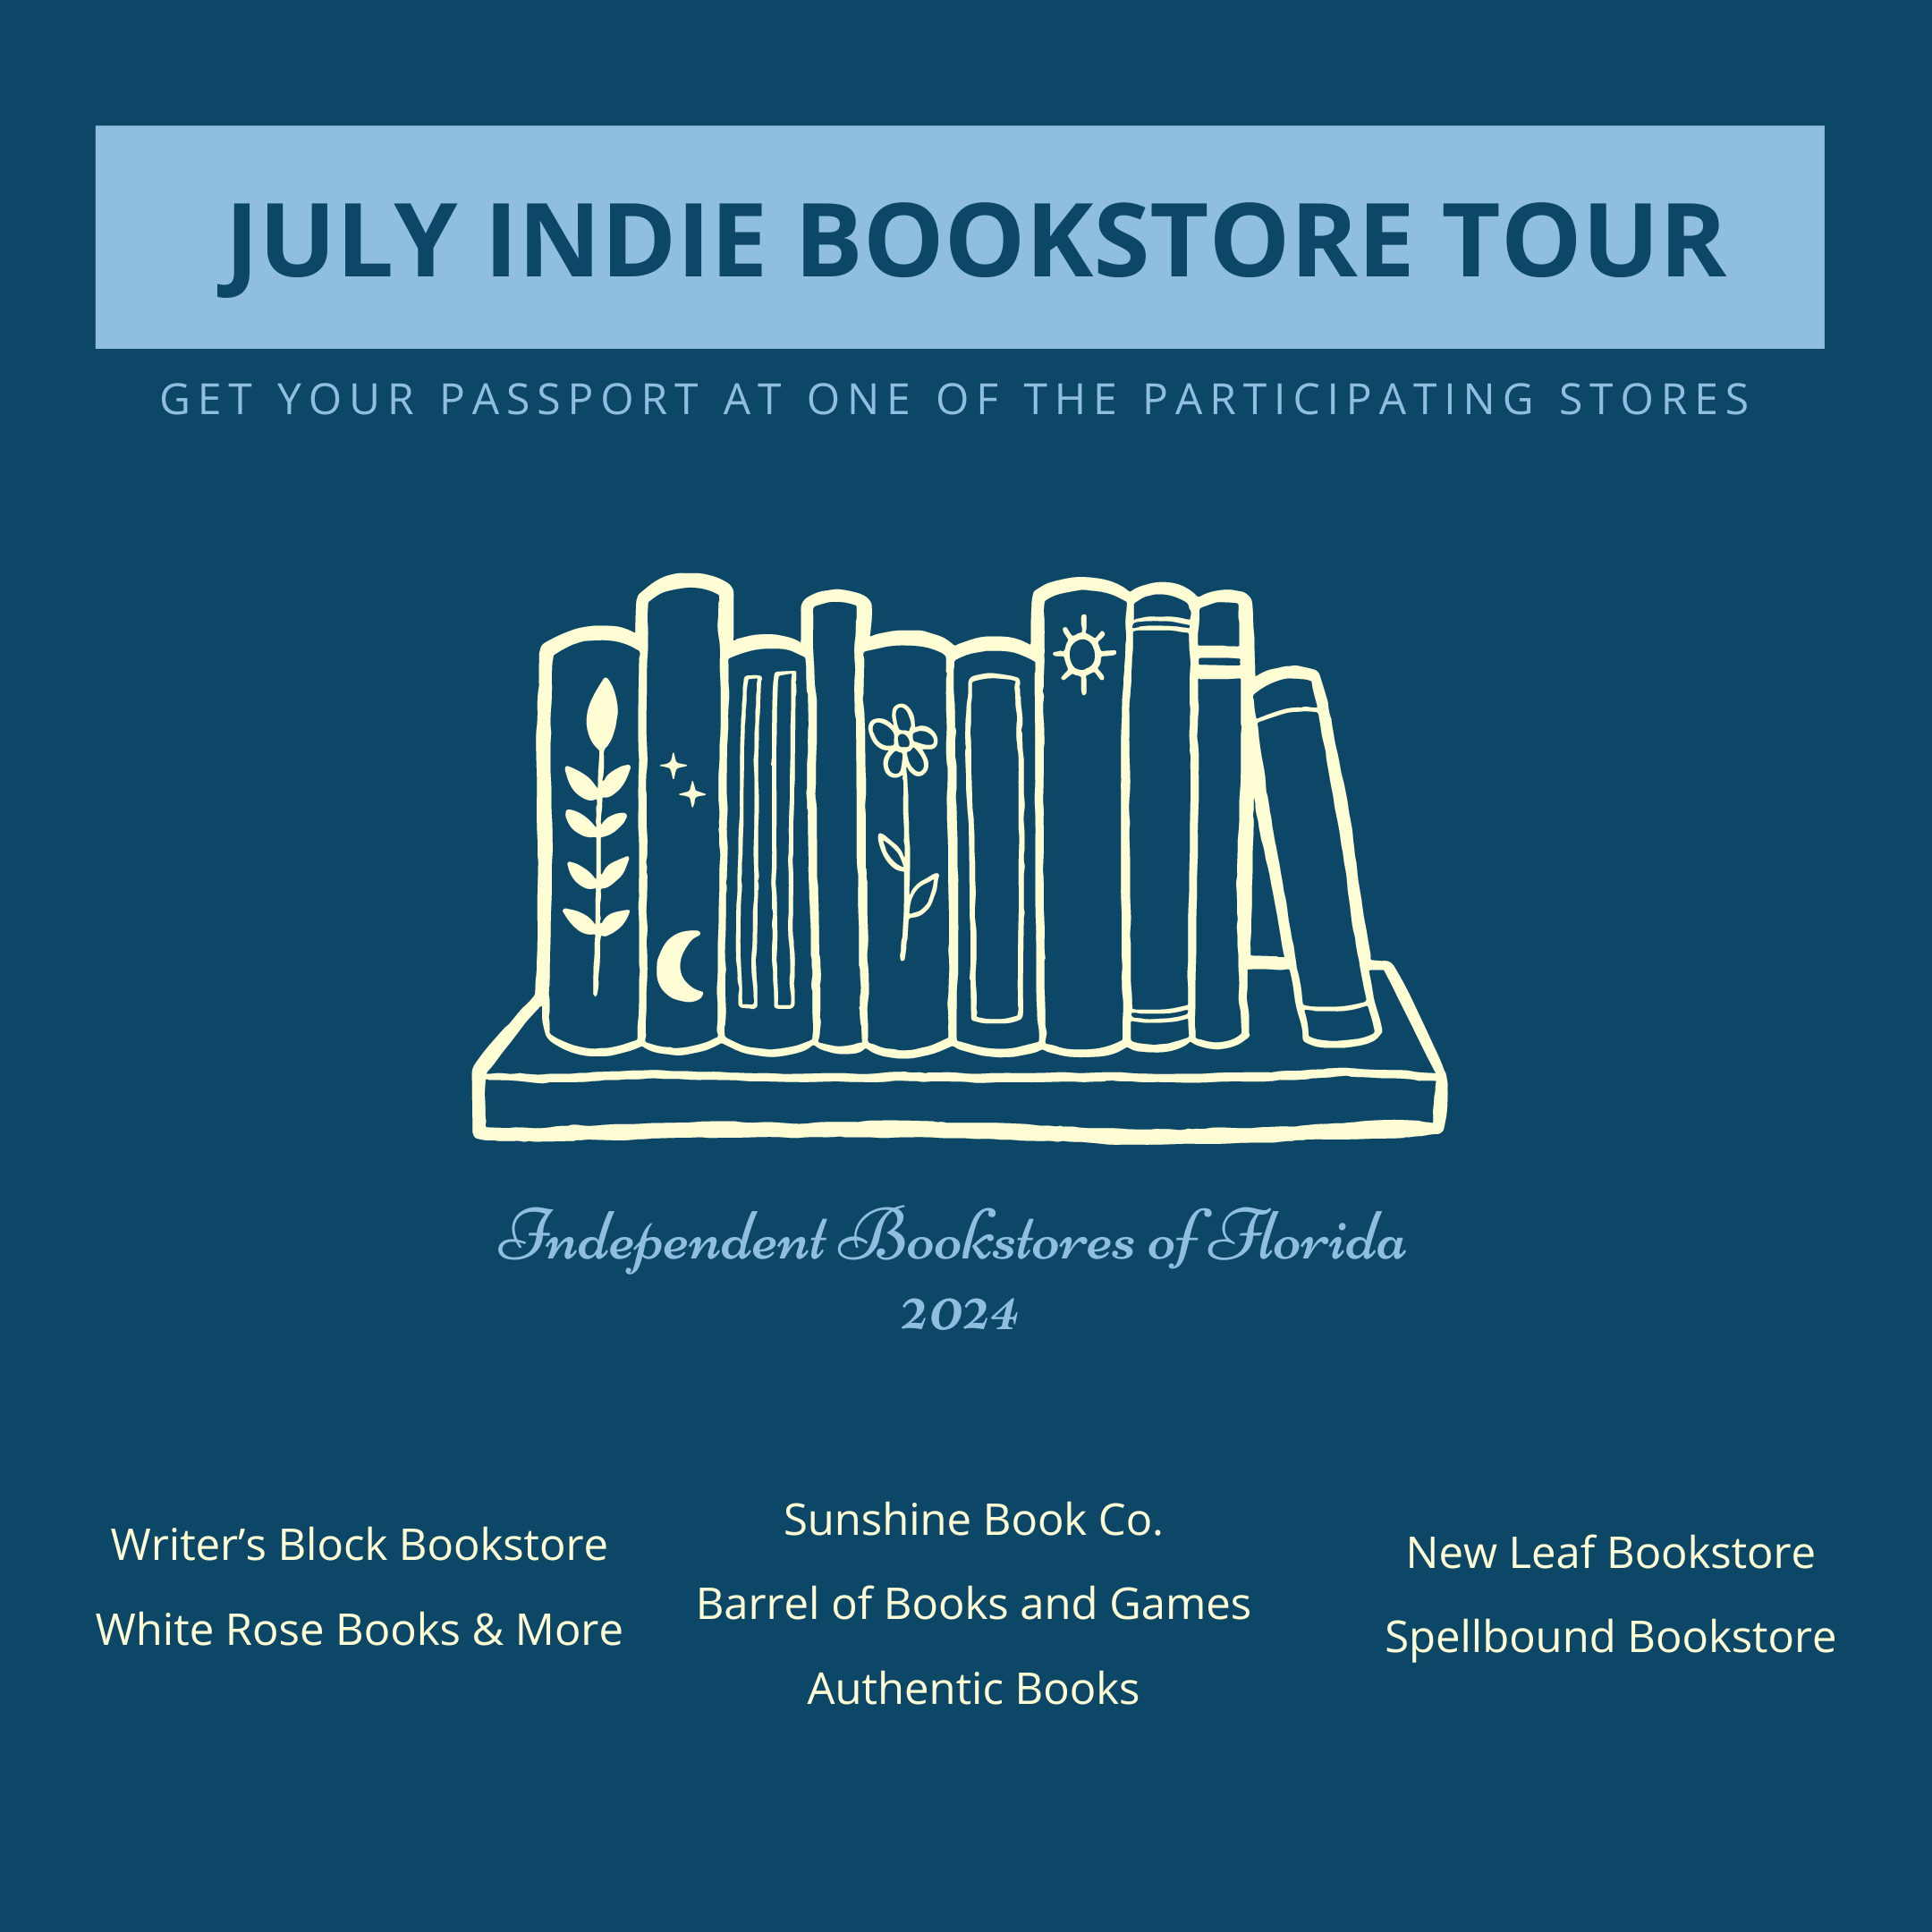 Indie bookstore tour in July